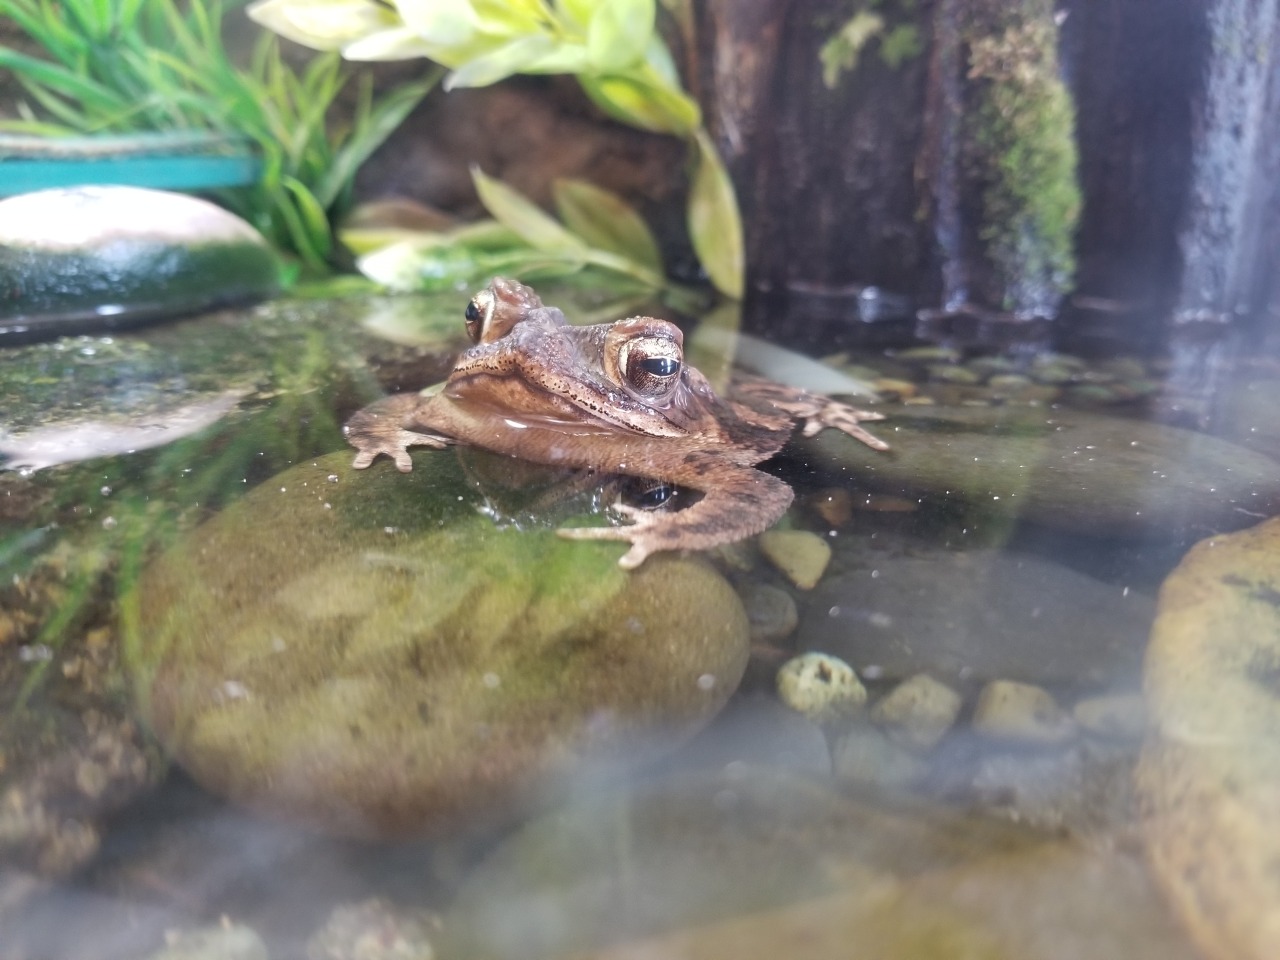 snowflakeeel: snowflakeeel: some lady called the toad that we have at work “ugly